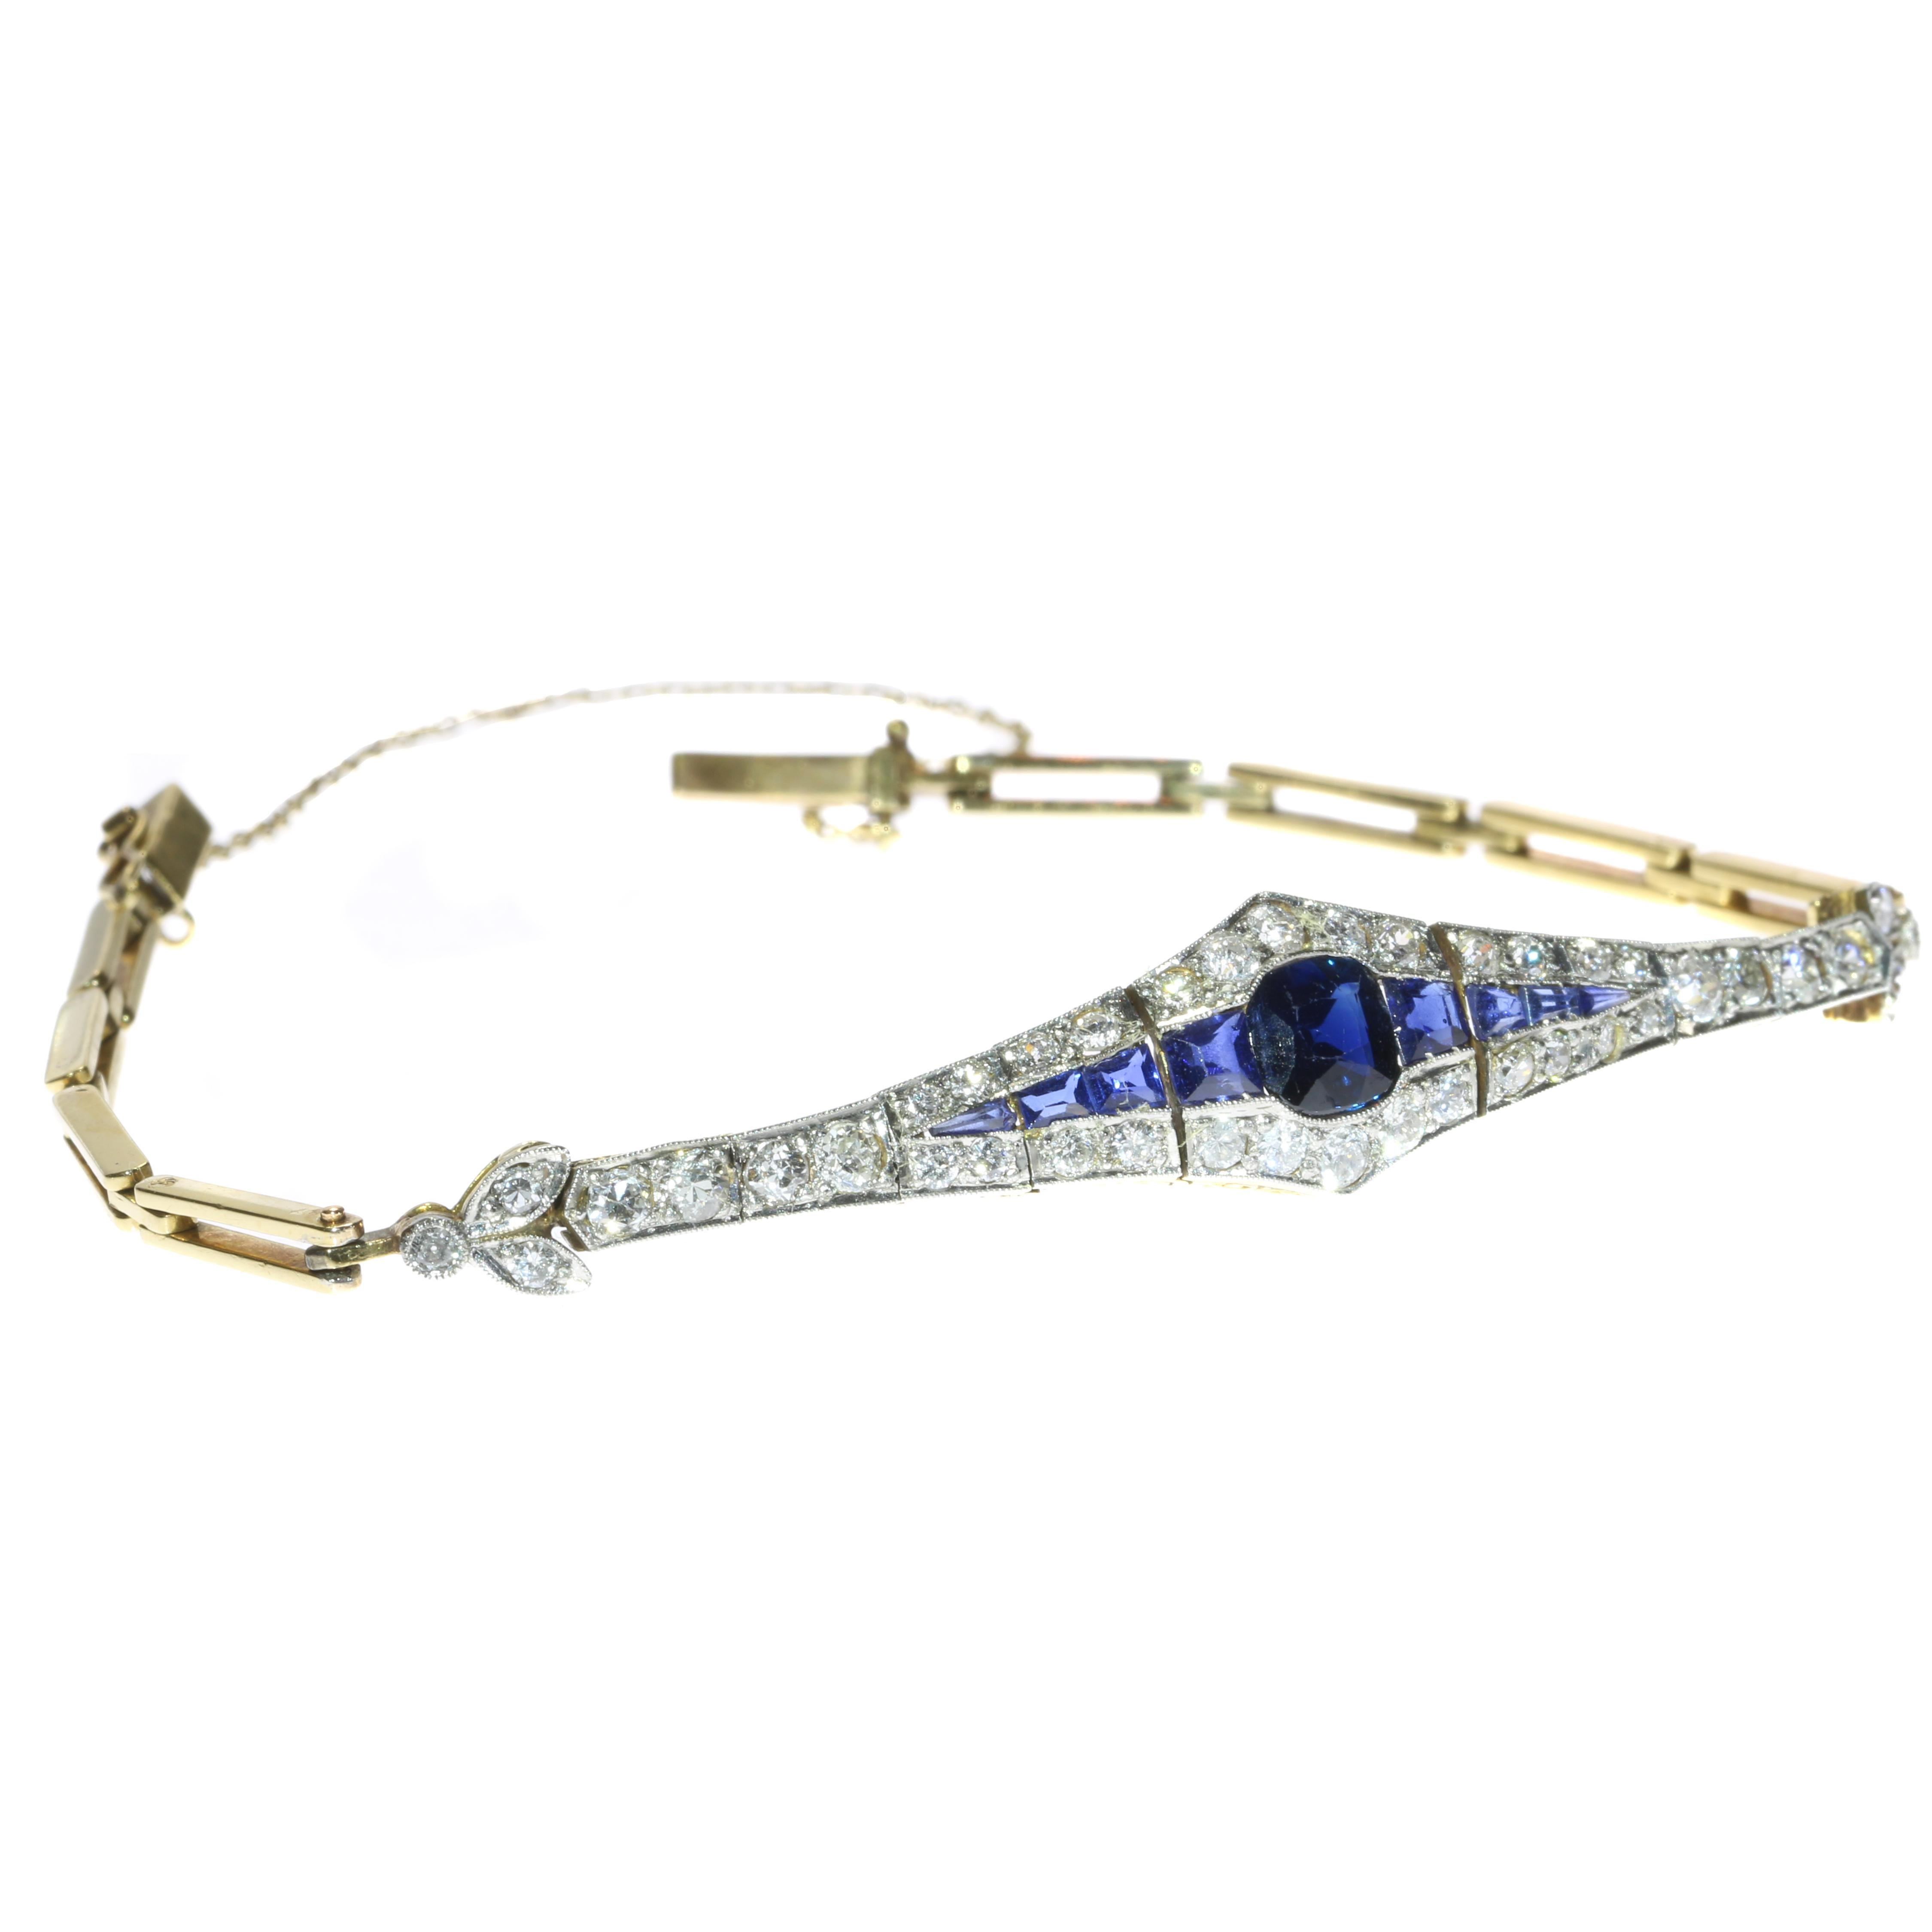 Belle Époque Gold and Platinum Bracelet with Diamonds and Sapphires For Sale